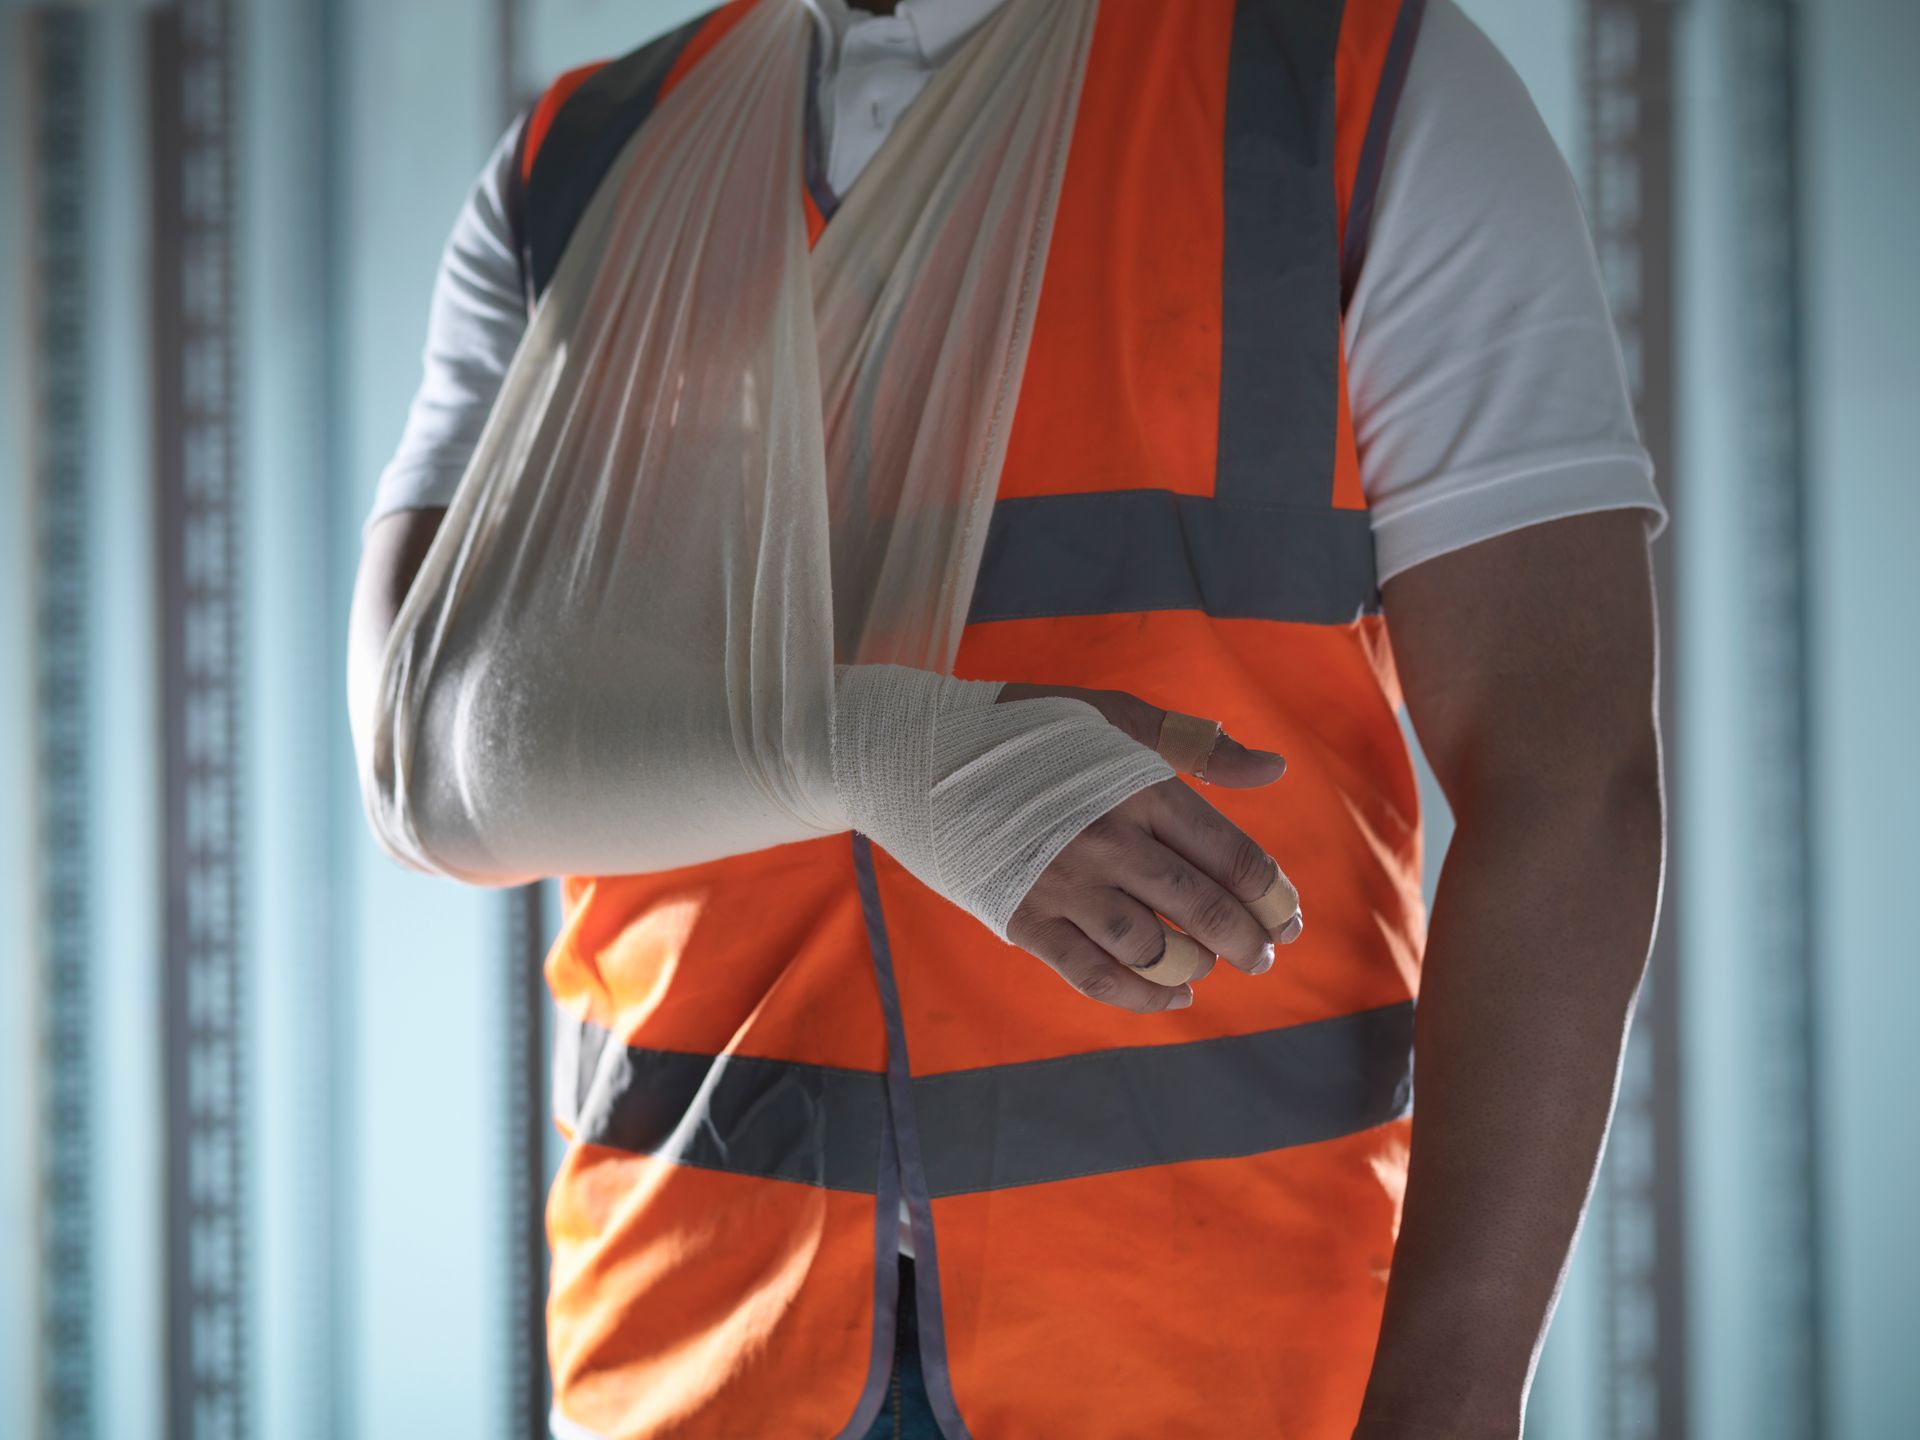 Injured Worker with Bandaged Arm in Sling | Fall River, MA | DGK Law